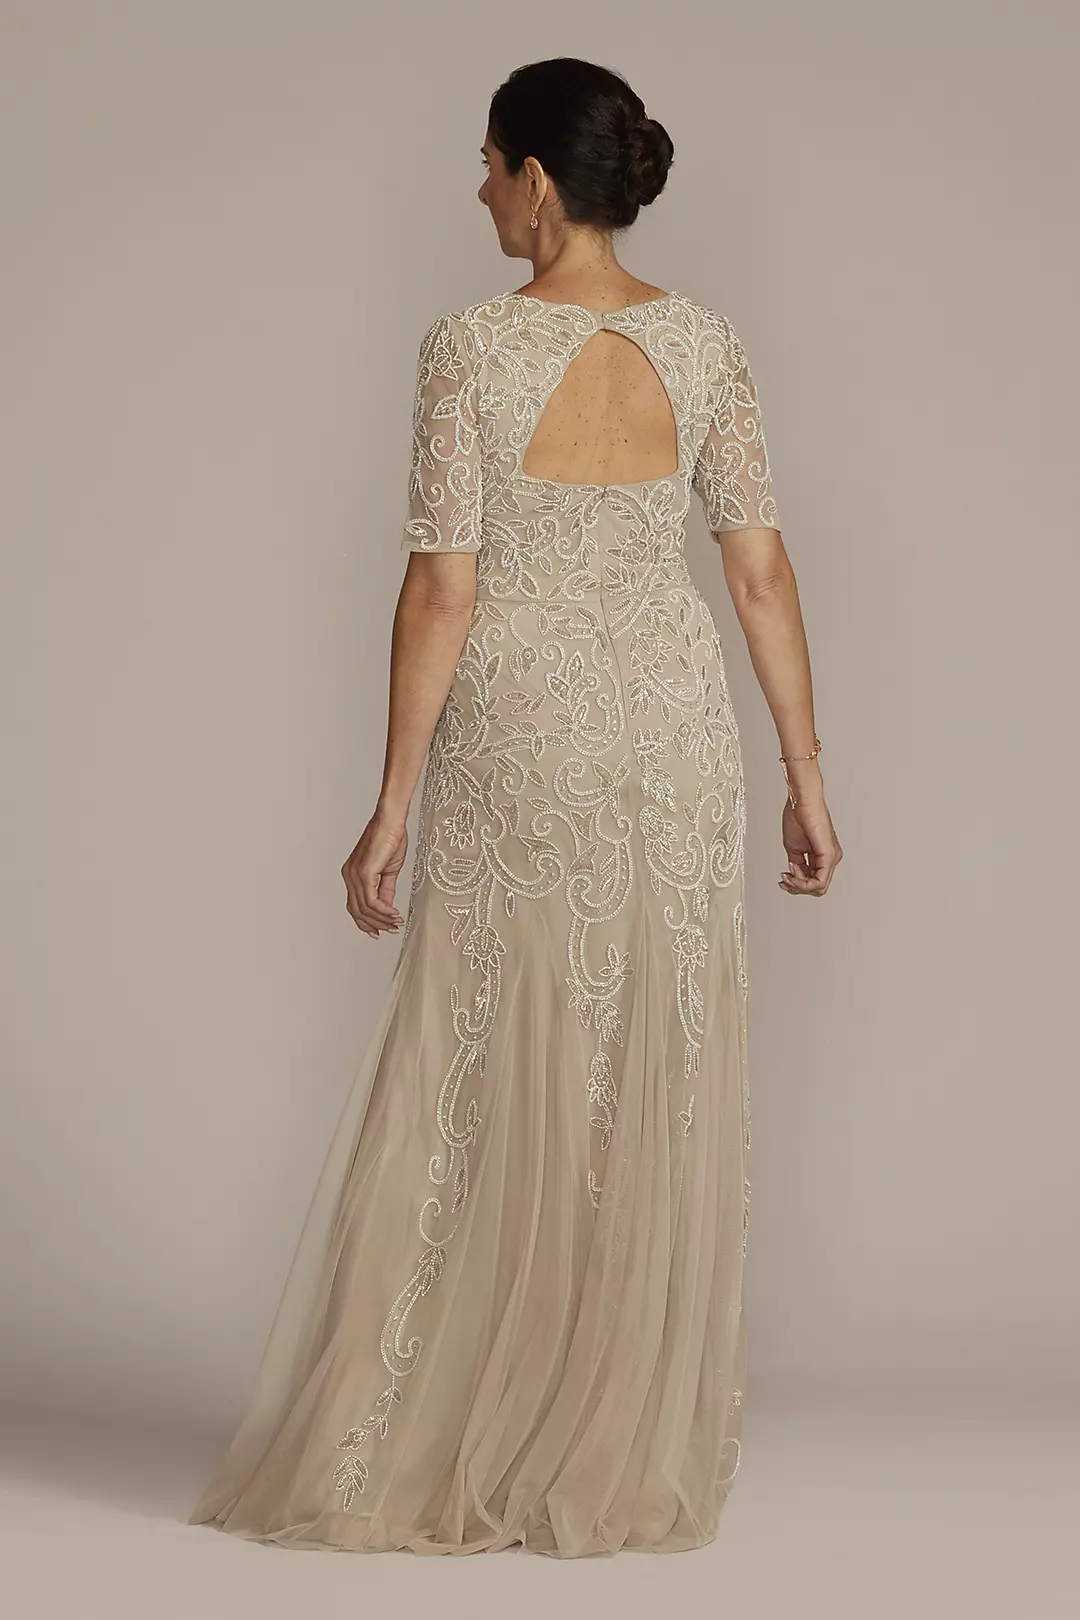 Beaded Godet Gown with Elbow Length Sleeves Image 2